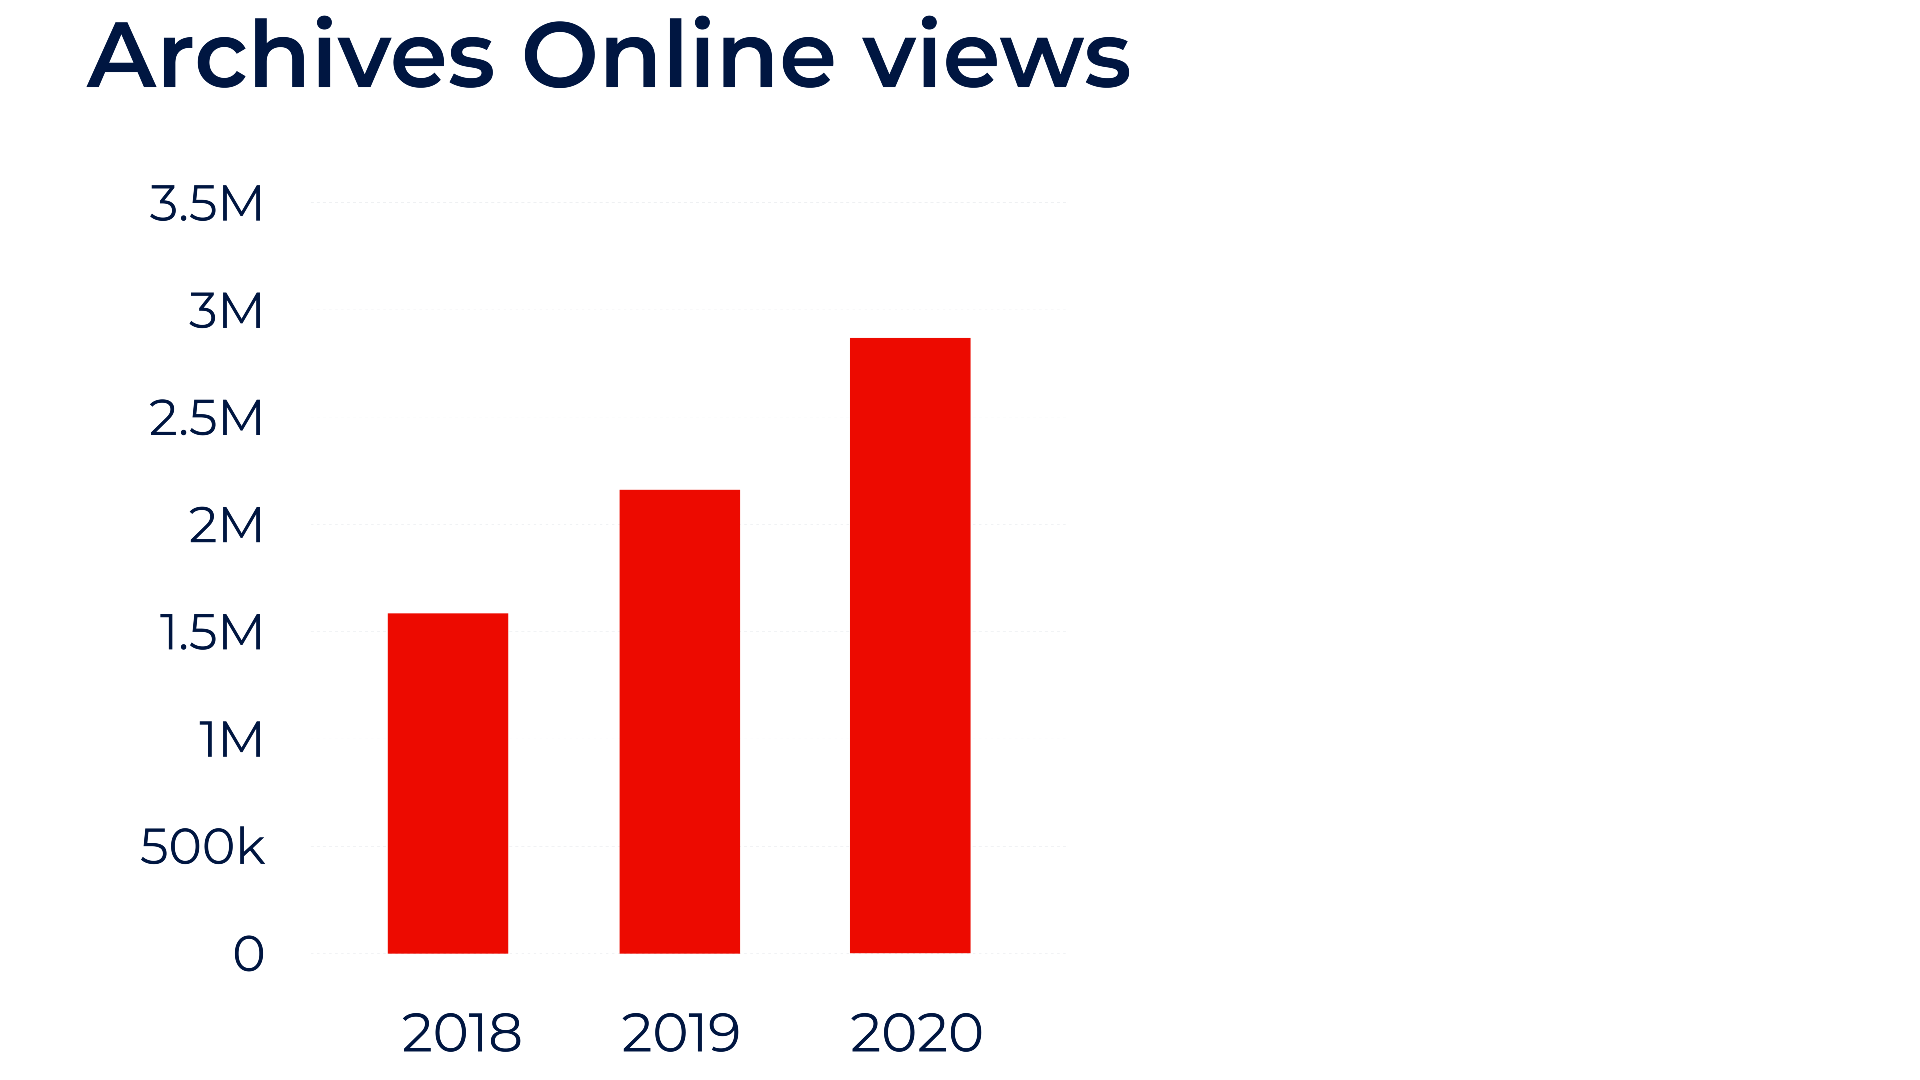 Column graph of Archives Online views increasing from over 1.5 million in 2018 to 2.9 million in 2020.